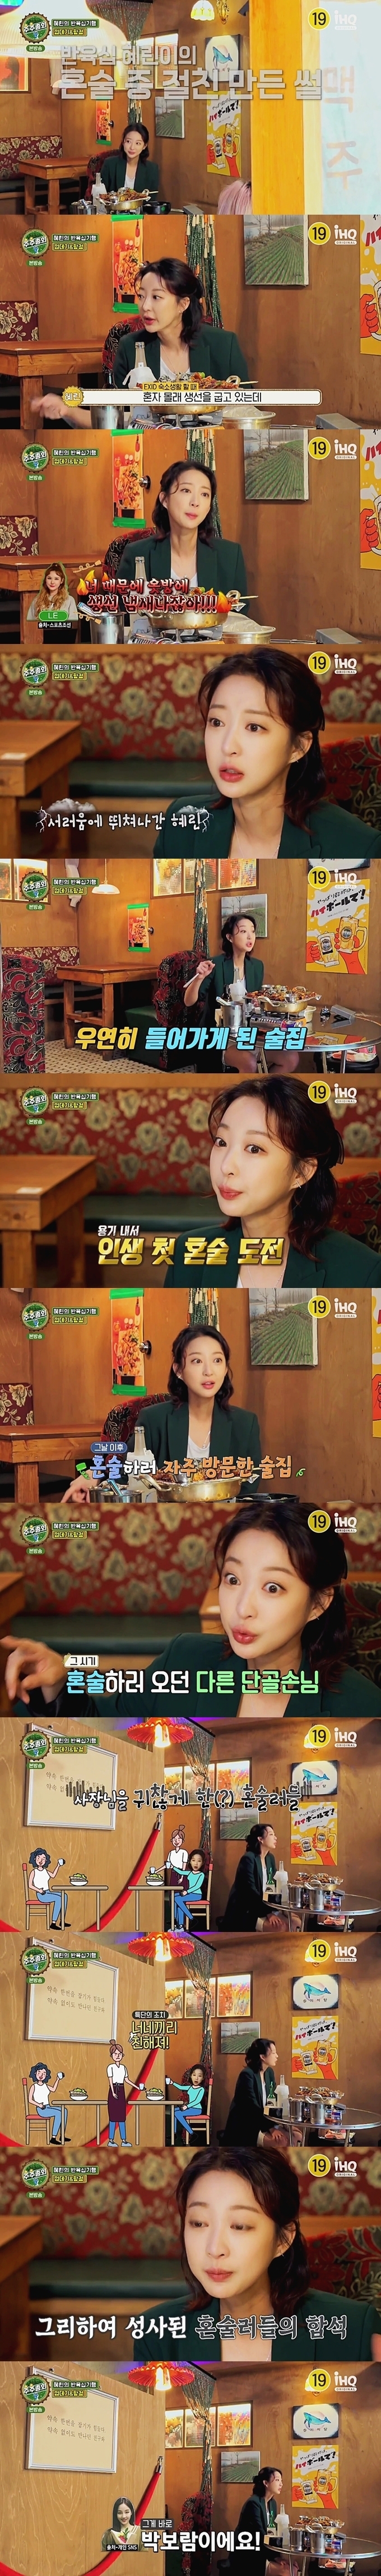 EXID Hyelin made a best friend while drinking alone